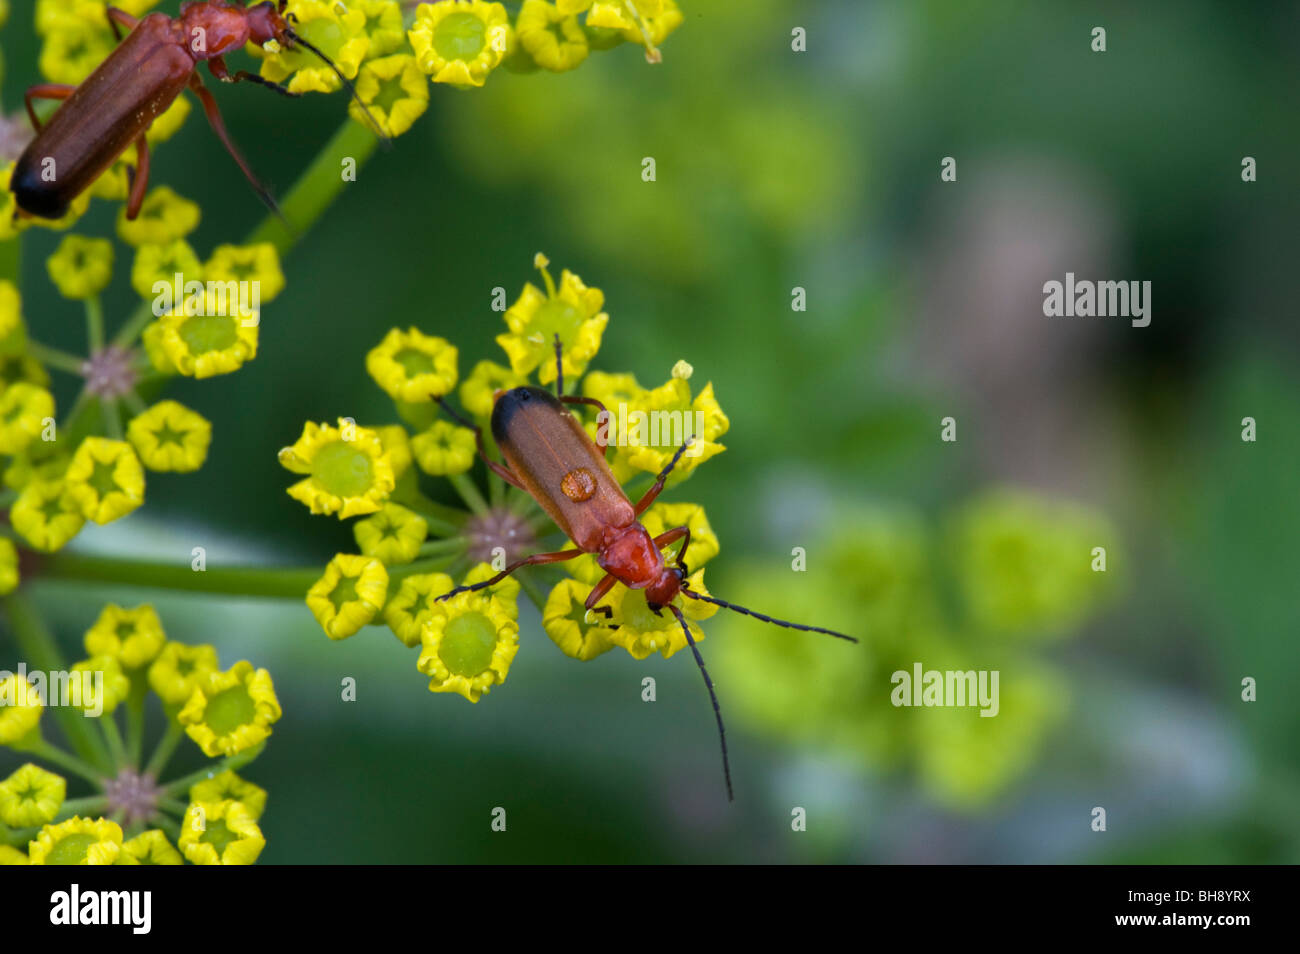 Wild Parsnip (Pastinaca sativa) with Soldier Beetle (Cantharis rustica) Stock Photo